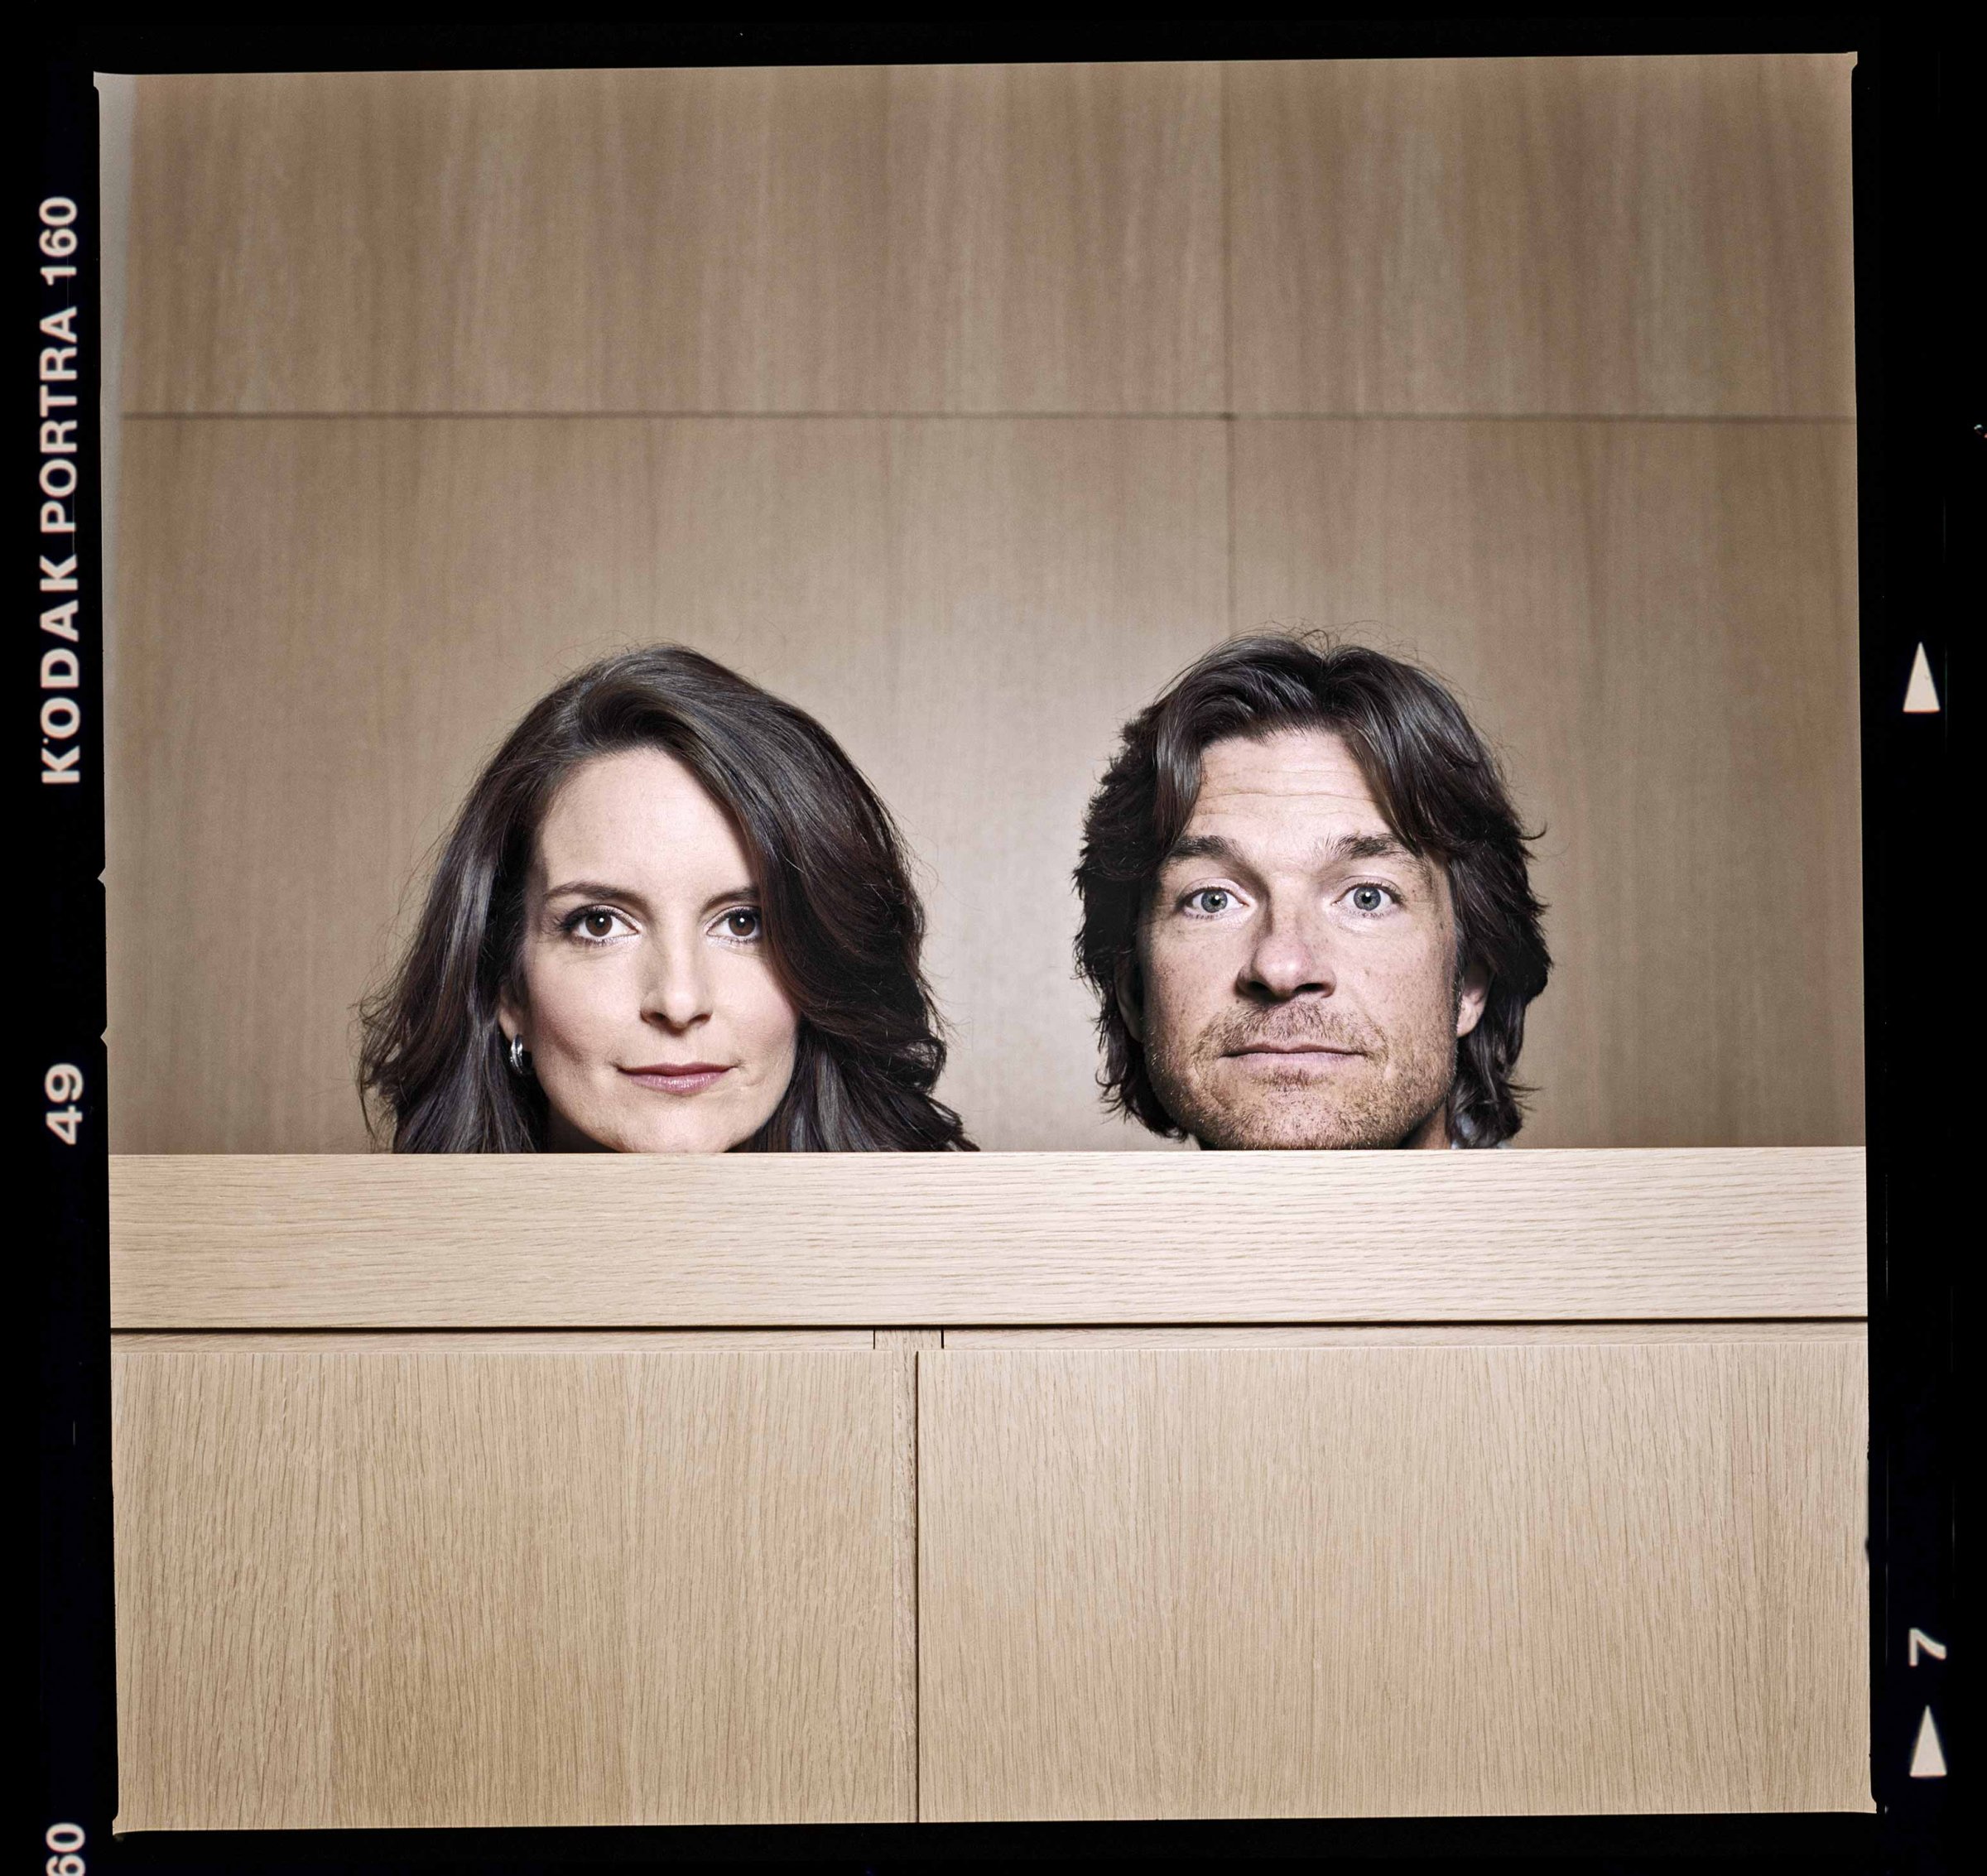 Tina Fey and Jason Bateman Portrait This Is Where I Leave You